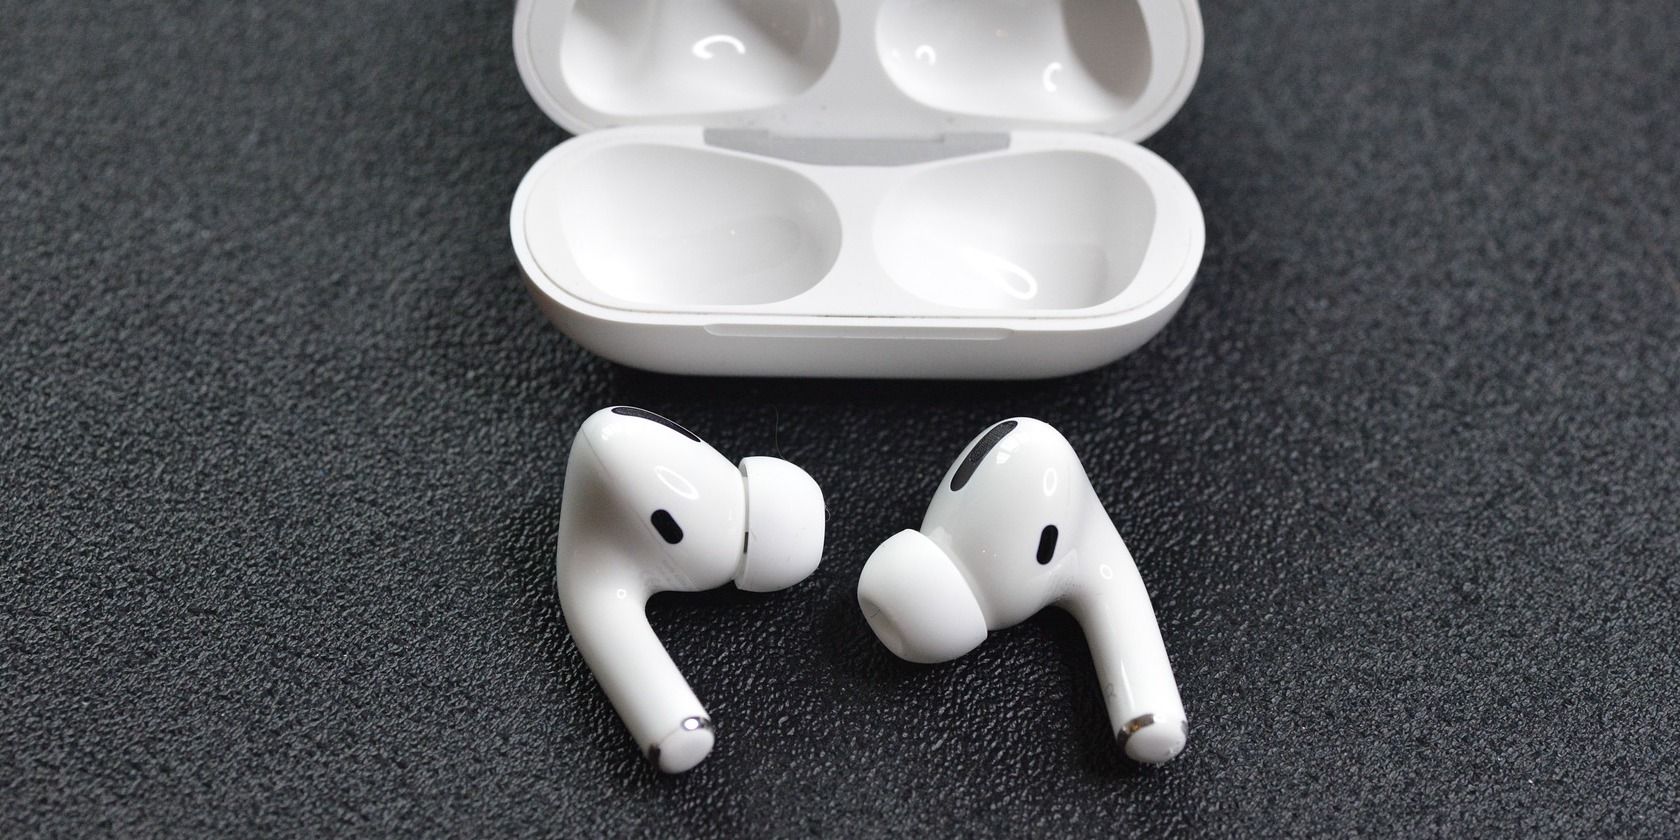 AirPods Pro vs. AirPods Pro 2: Should You Upgrade?